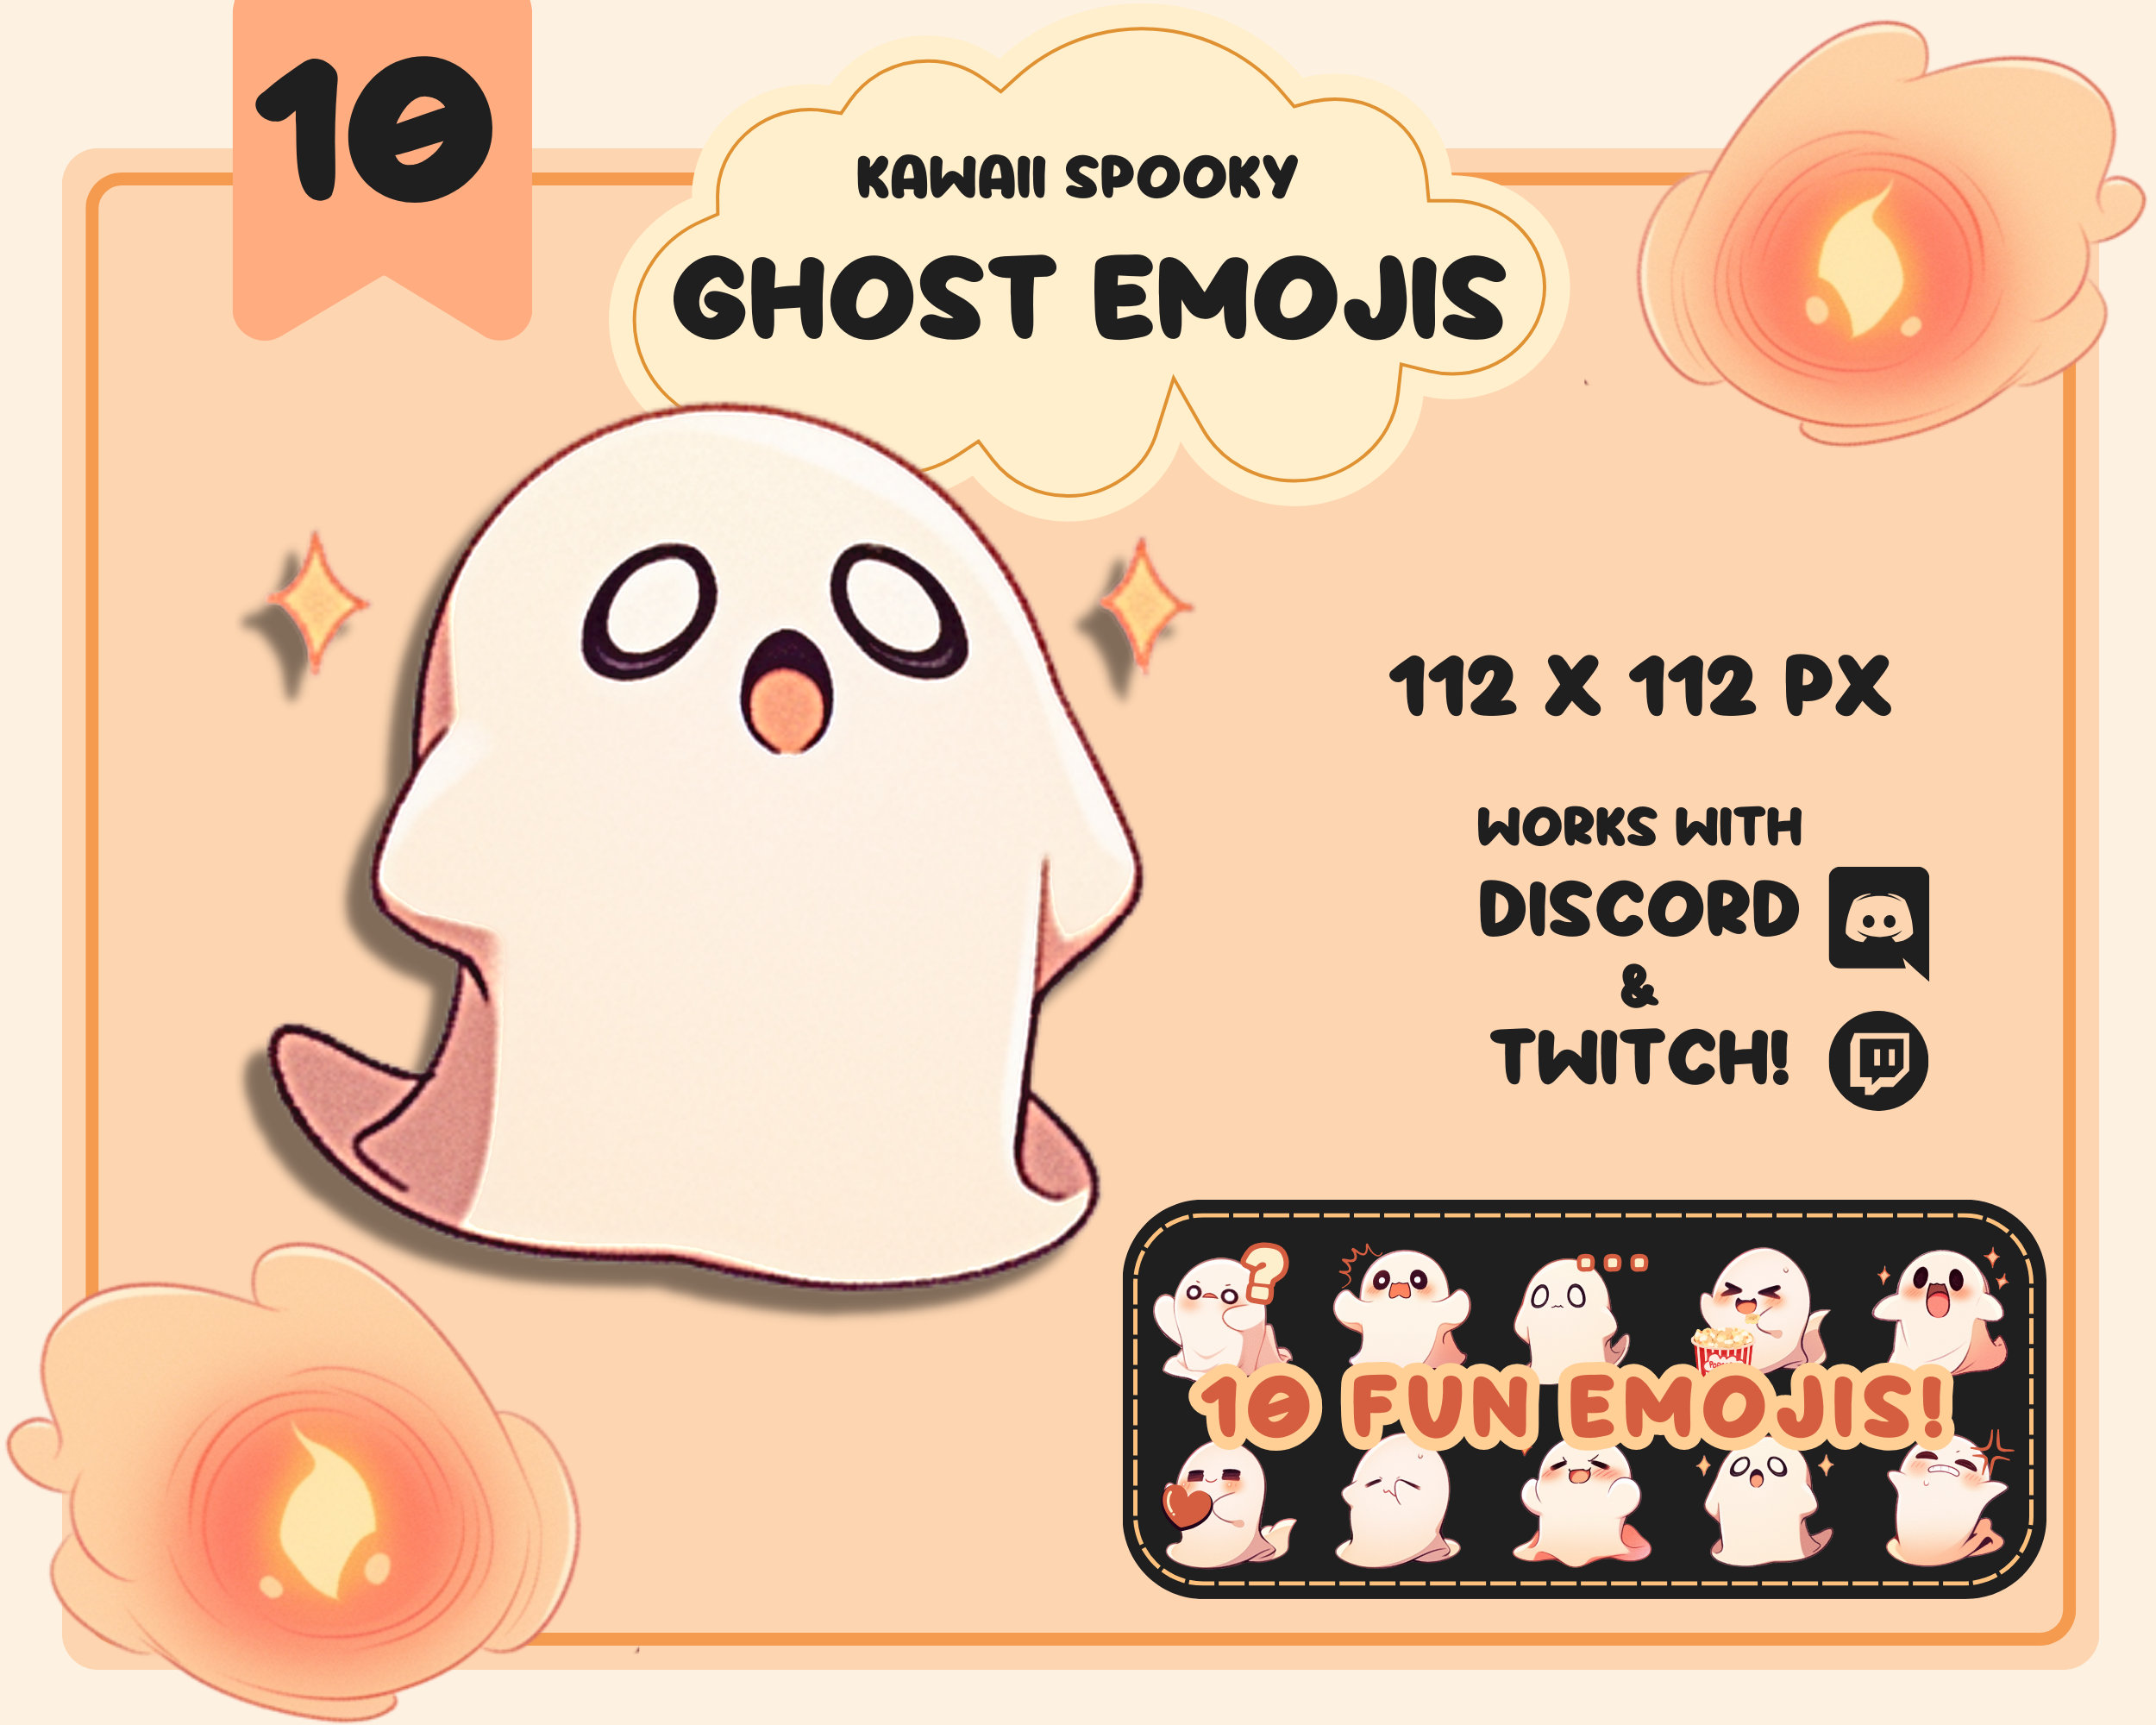 Cute Ghost Discord Role Icons 8-bit Pixel Emojis and Emotes -  Norway